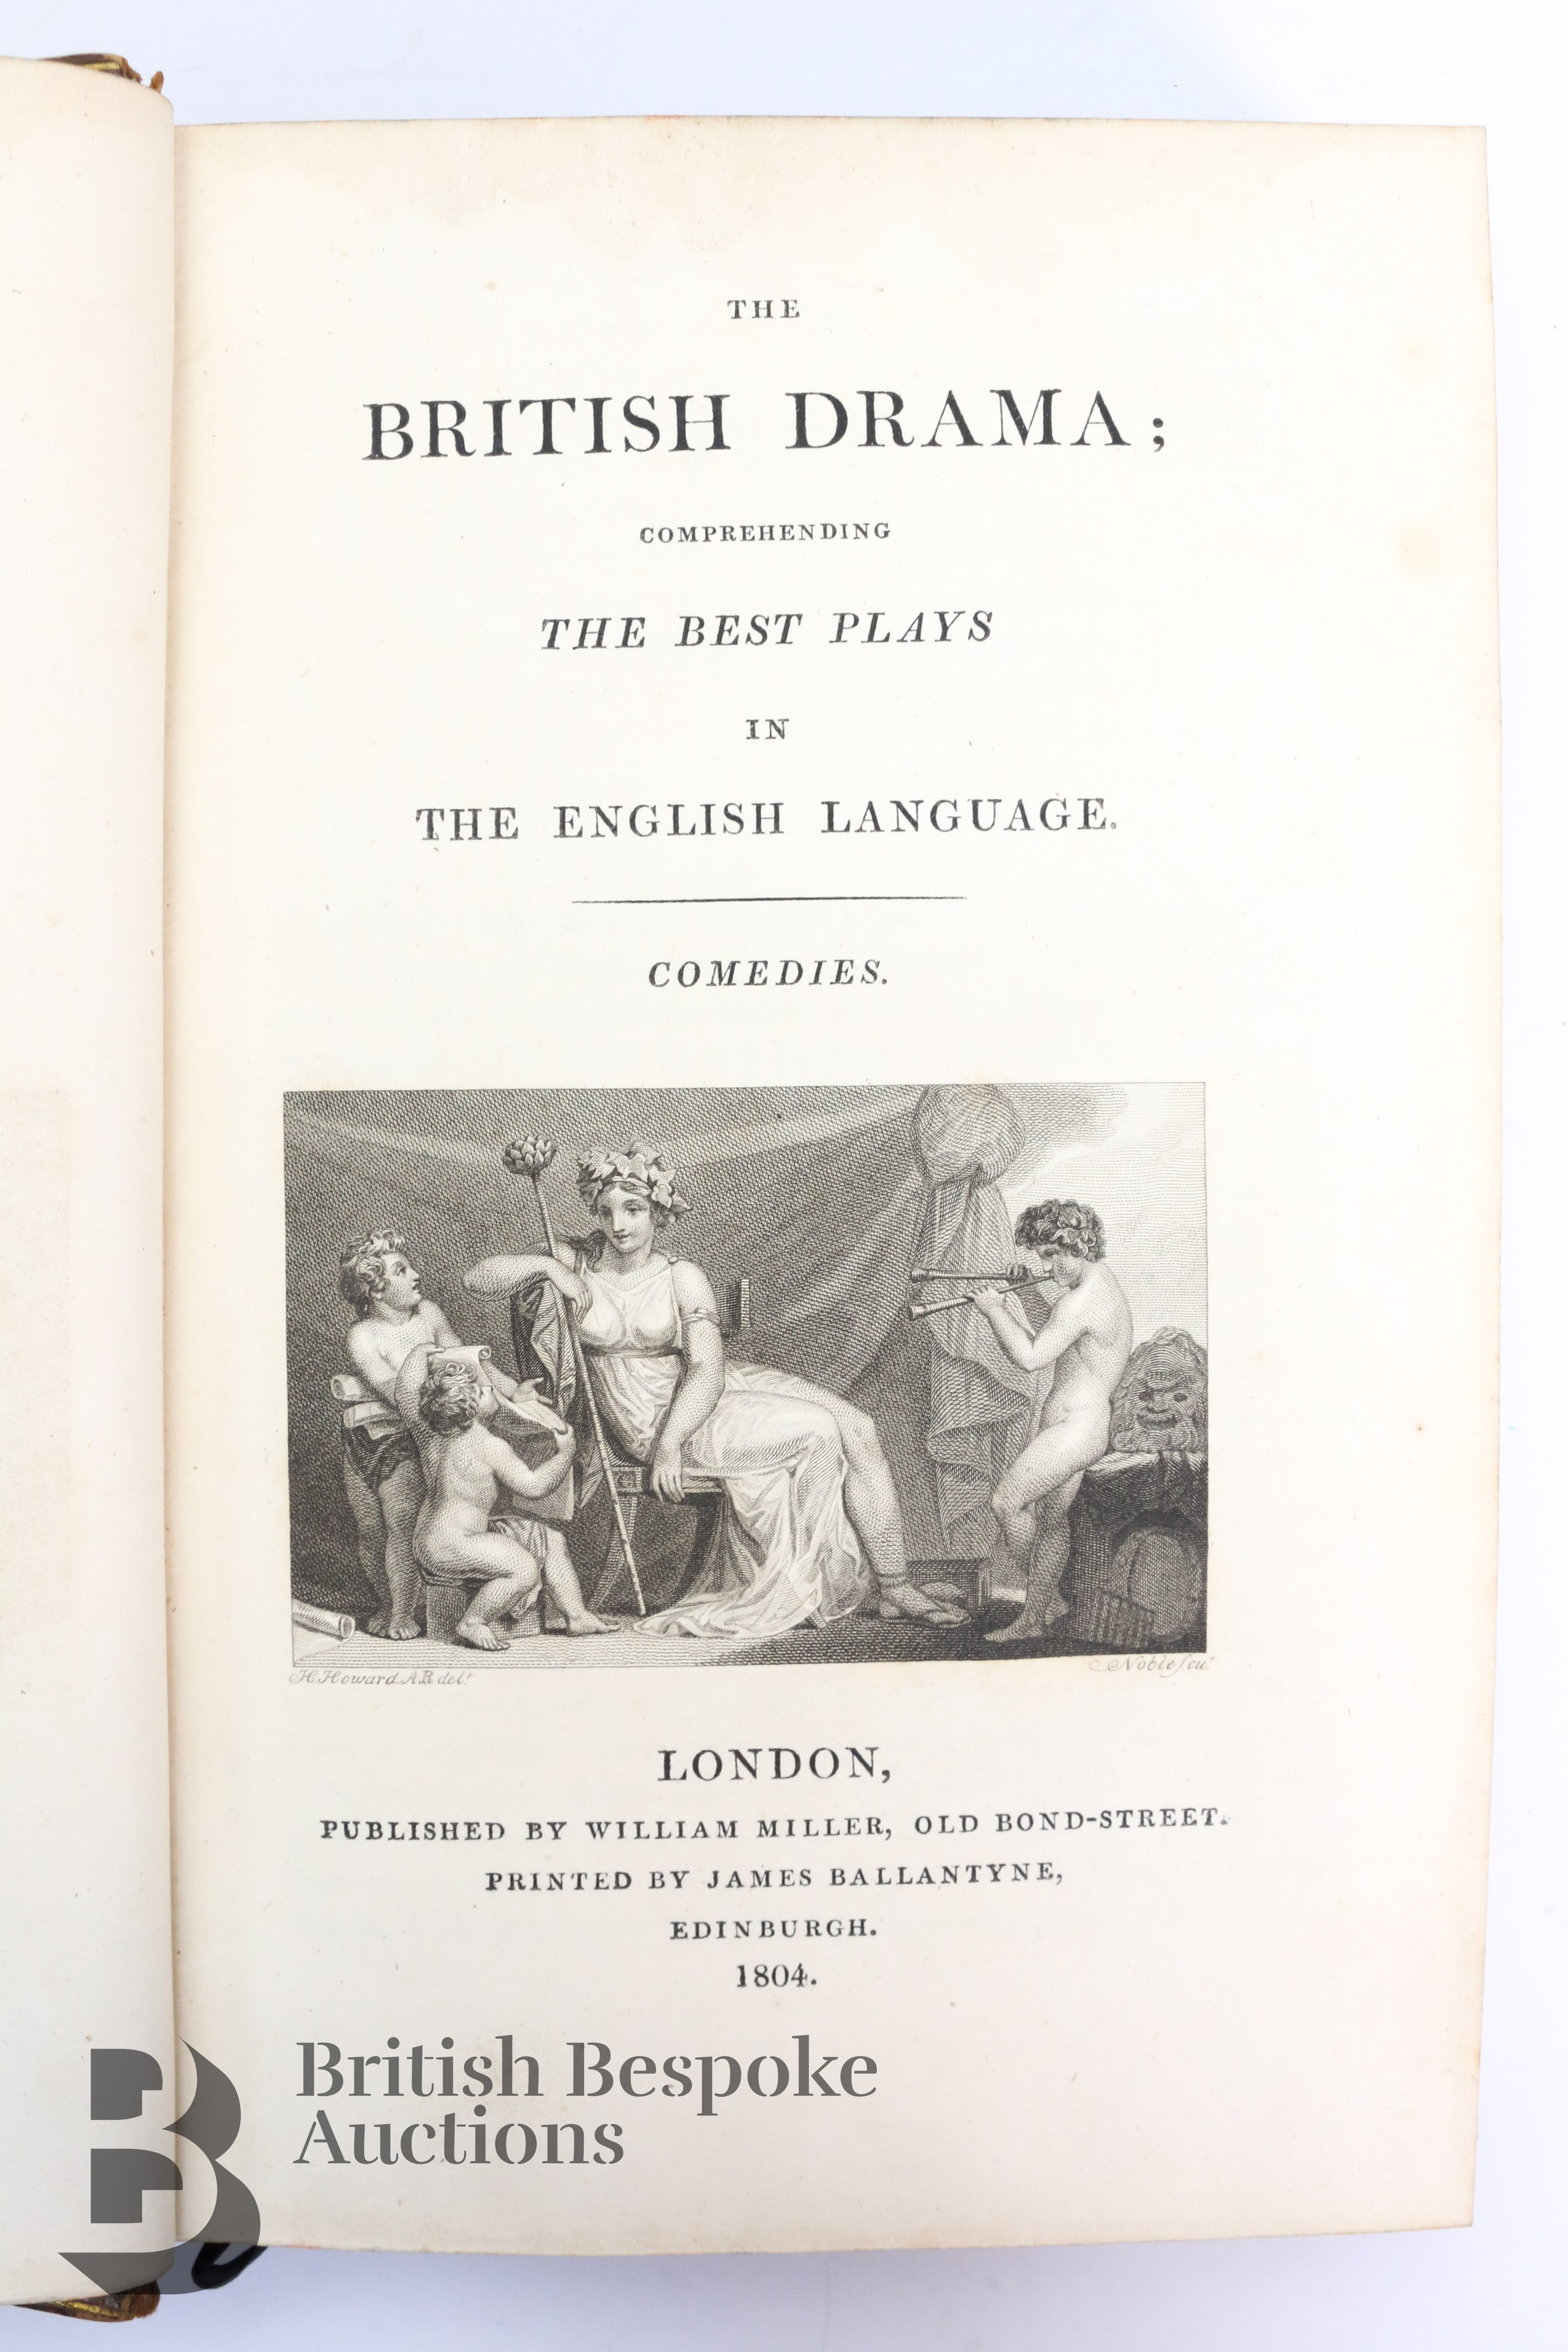 Seven Volumes of Shakespeare and British Drama Fine Bindings - Image 50 of 52